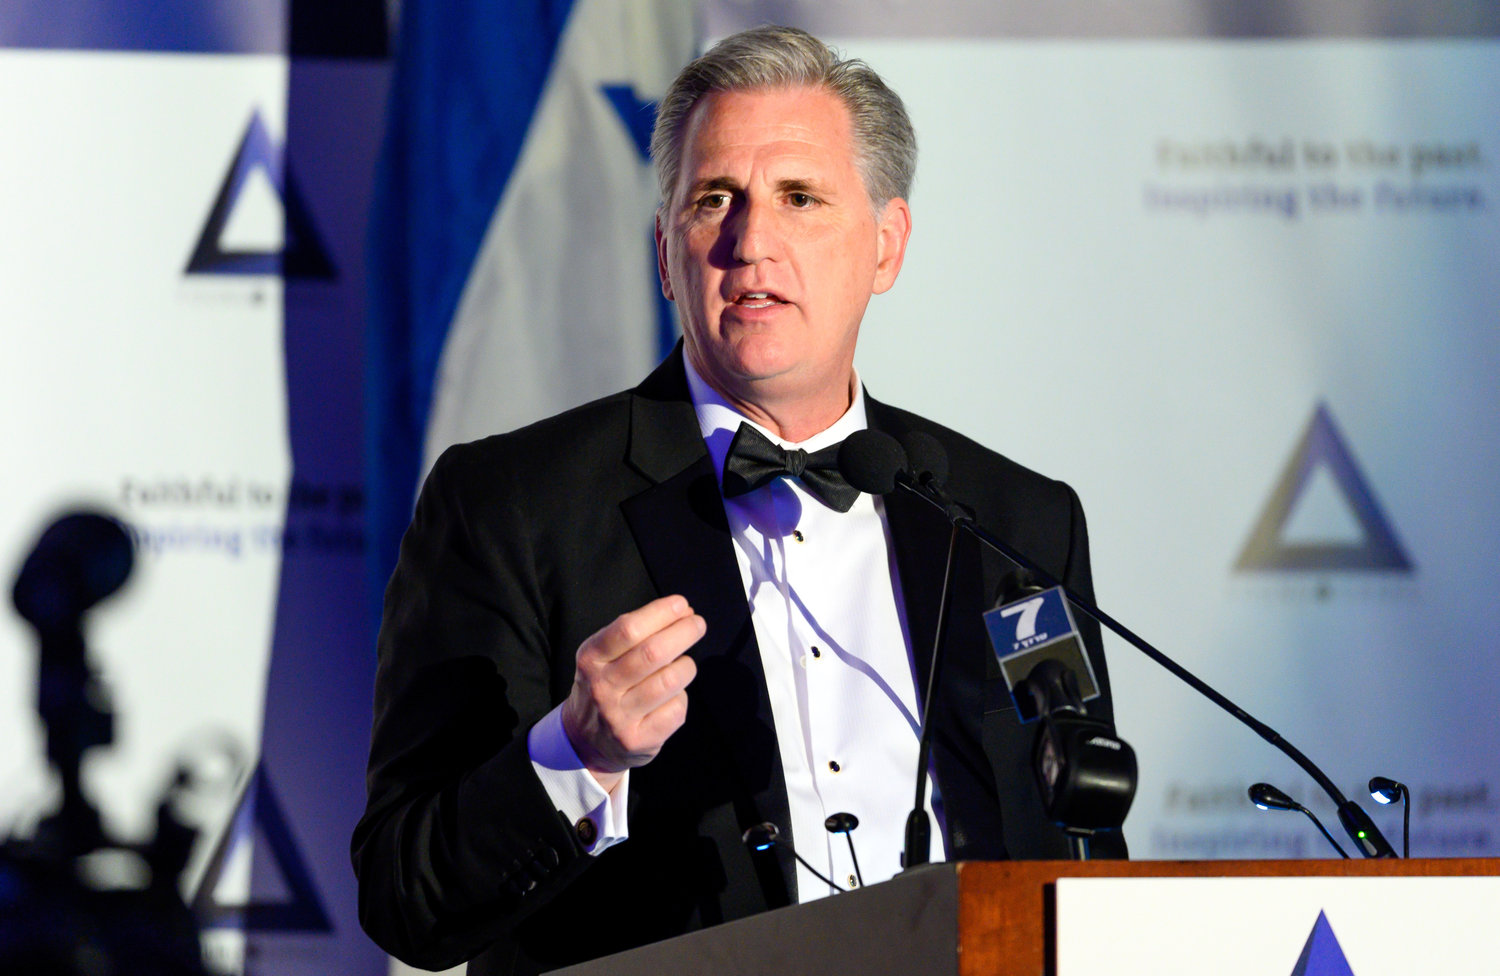 Rep. Kevin McCarthy, the House minority leader, speaks at the gala dinner of the National Council of Young Israel on March 31.